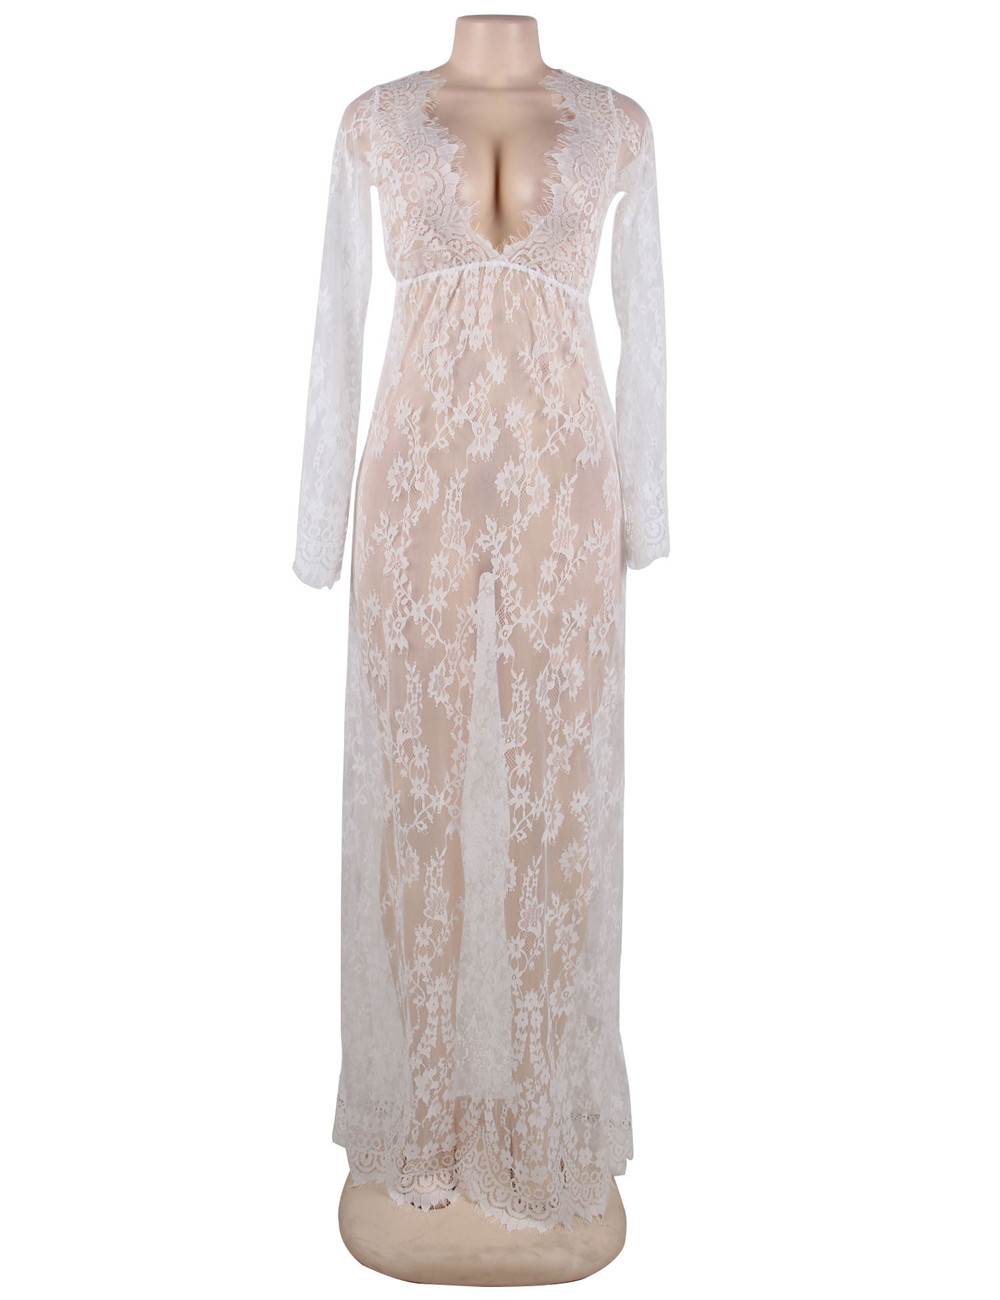 Plus Size White Sheer Lace Kaftan Robe with Thong | Ohyeahlady